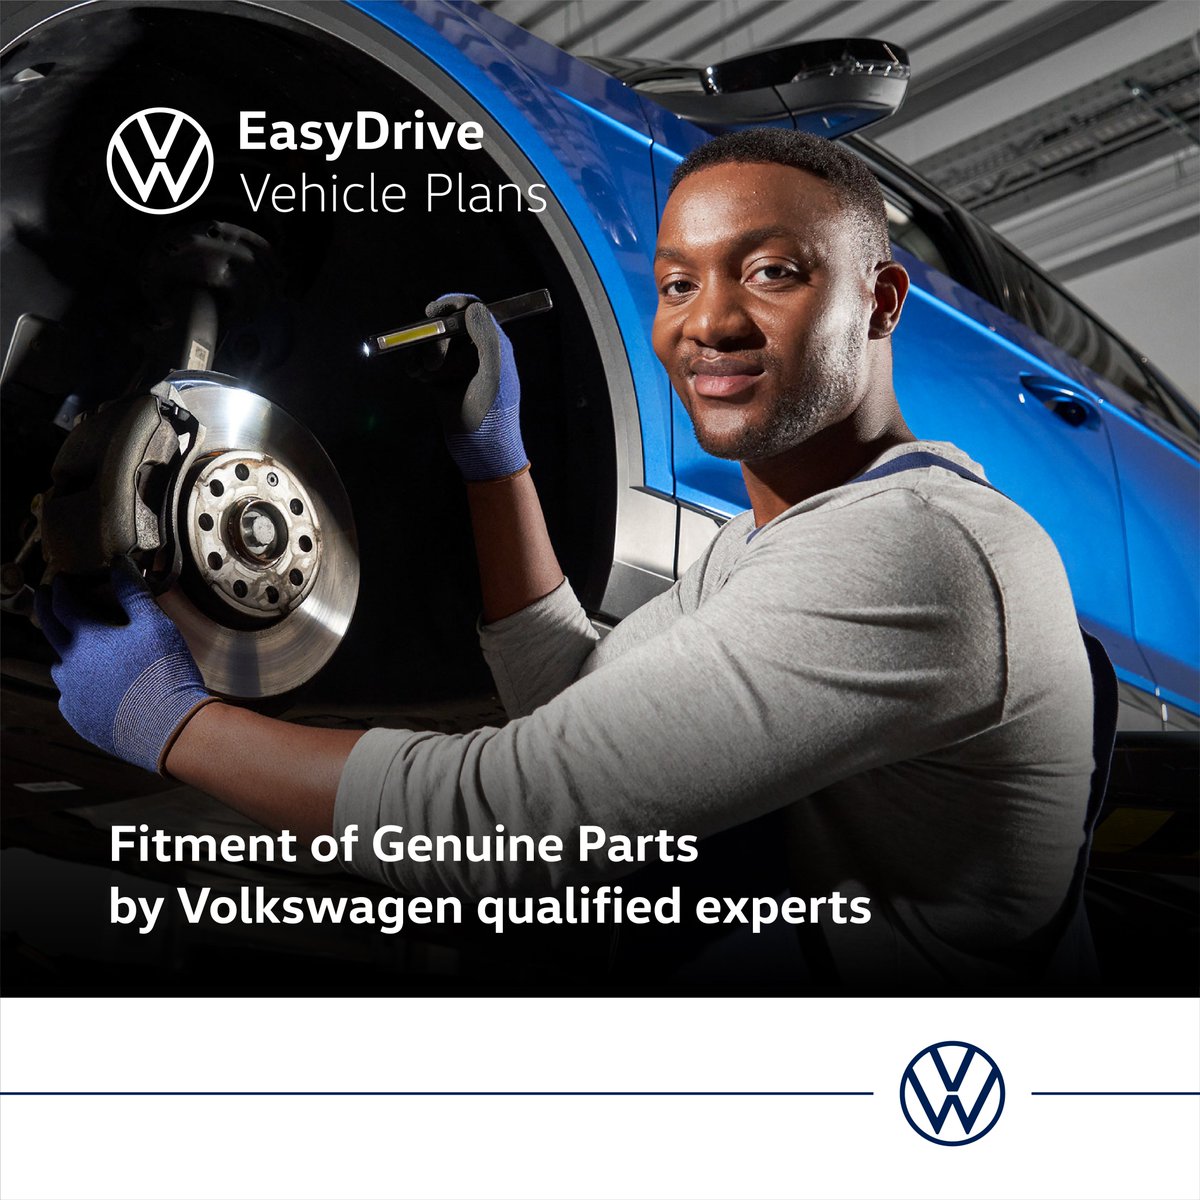 Experience the future of convenience with Volkswagen Easy Drive vehicle Plans! Your journey, your terms. Discover stress-free maintenance and servicing that keeps your Volkswagen running smoothly. 🚗💼#VolkswagenEasyDrivePlan #DriveWithConfidence #CarCareSimplified